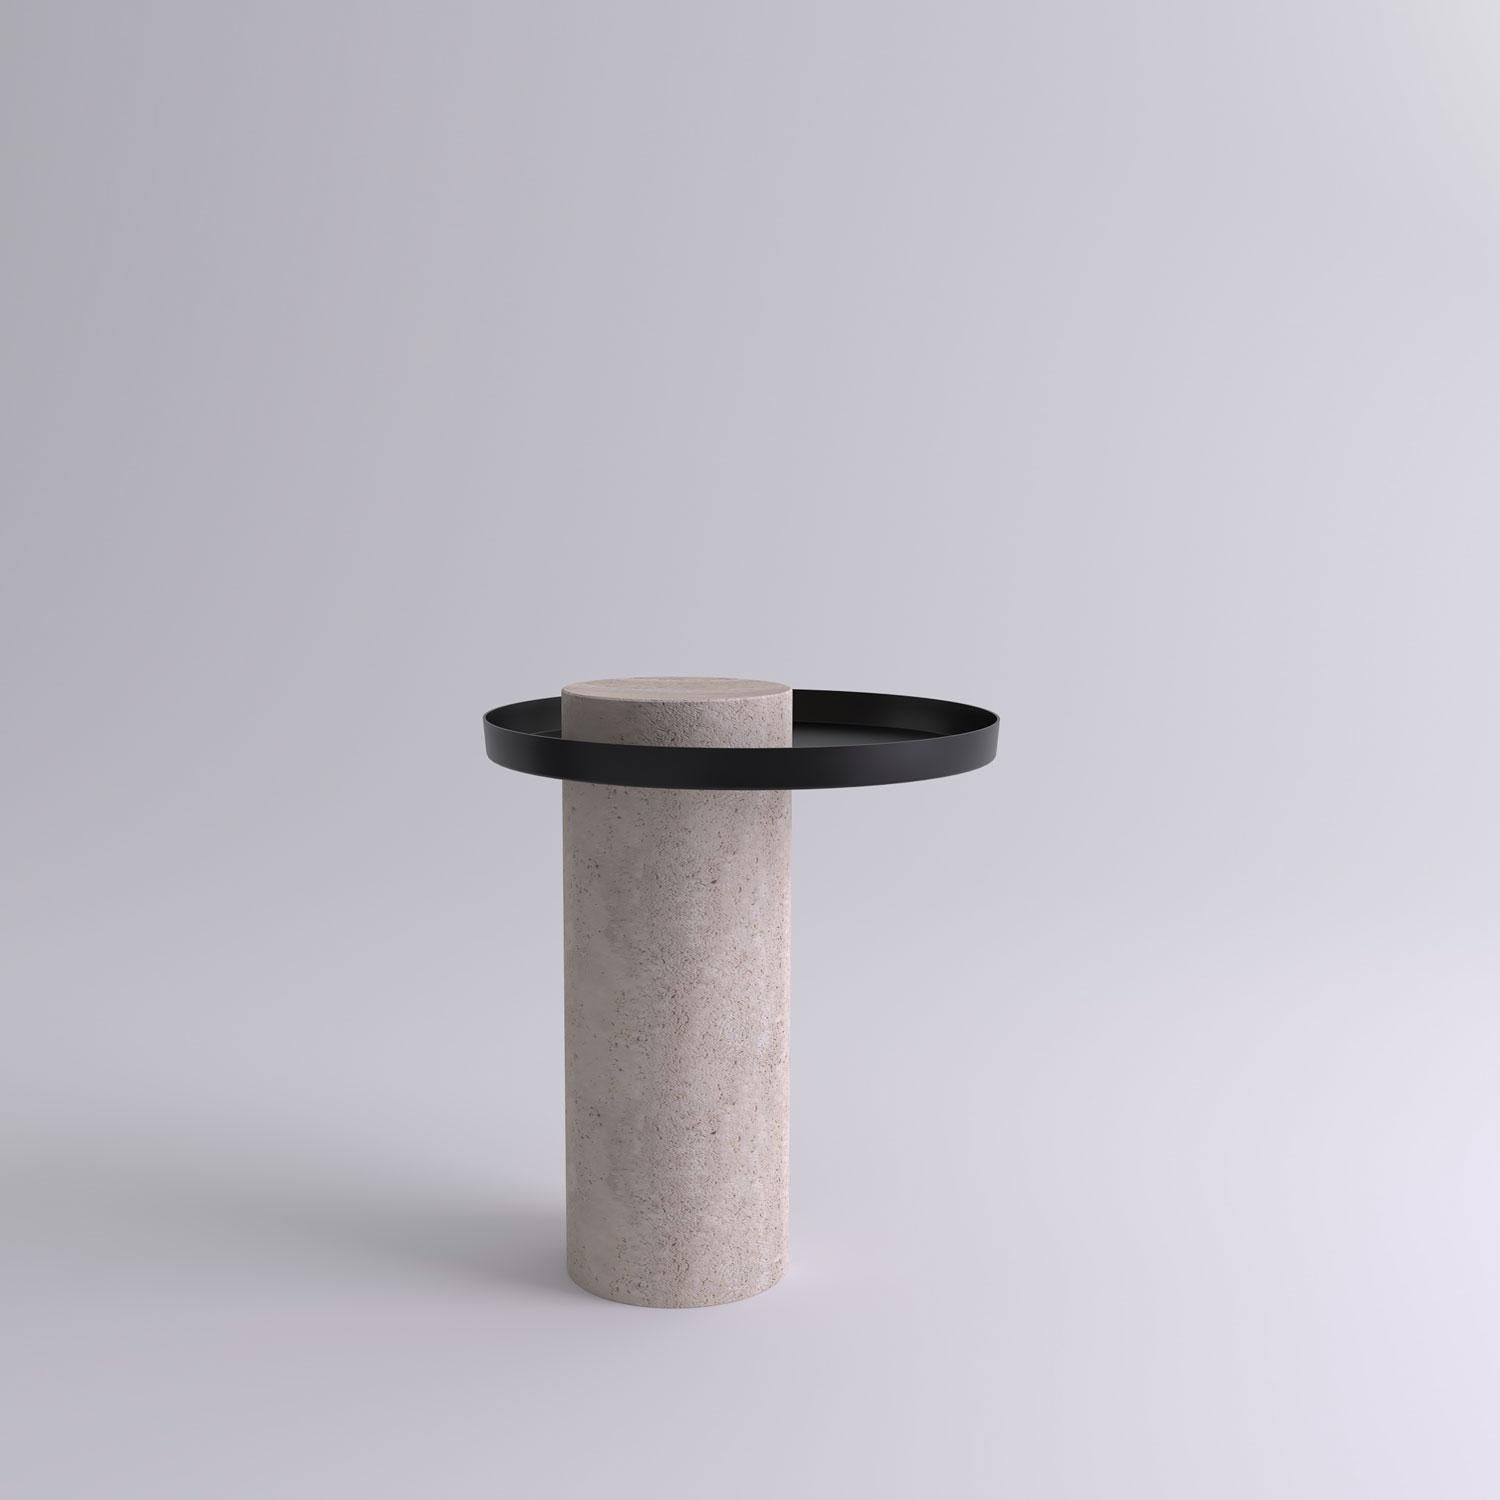 Medium travertine contemporary guéridon, Sebastian Herkner
Dimensions: D 40 x H 46 cm
Materials: Travertine stone, black metal tray

The salute table exists in 3 sizes, 4 different marble stones for the column and 5 different finishes for the